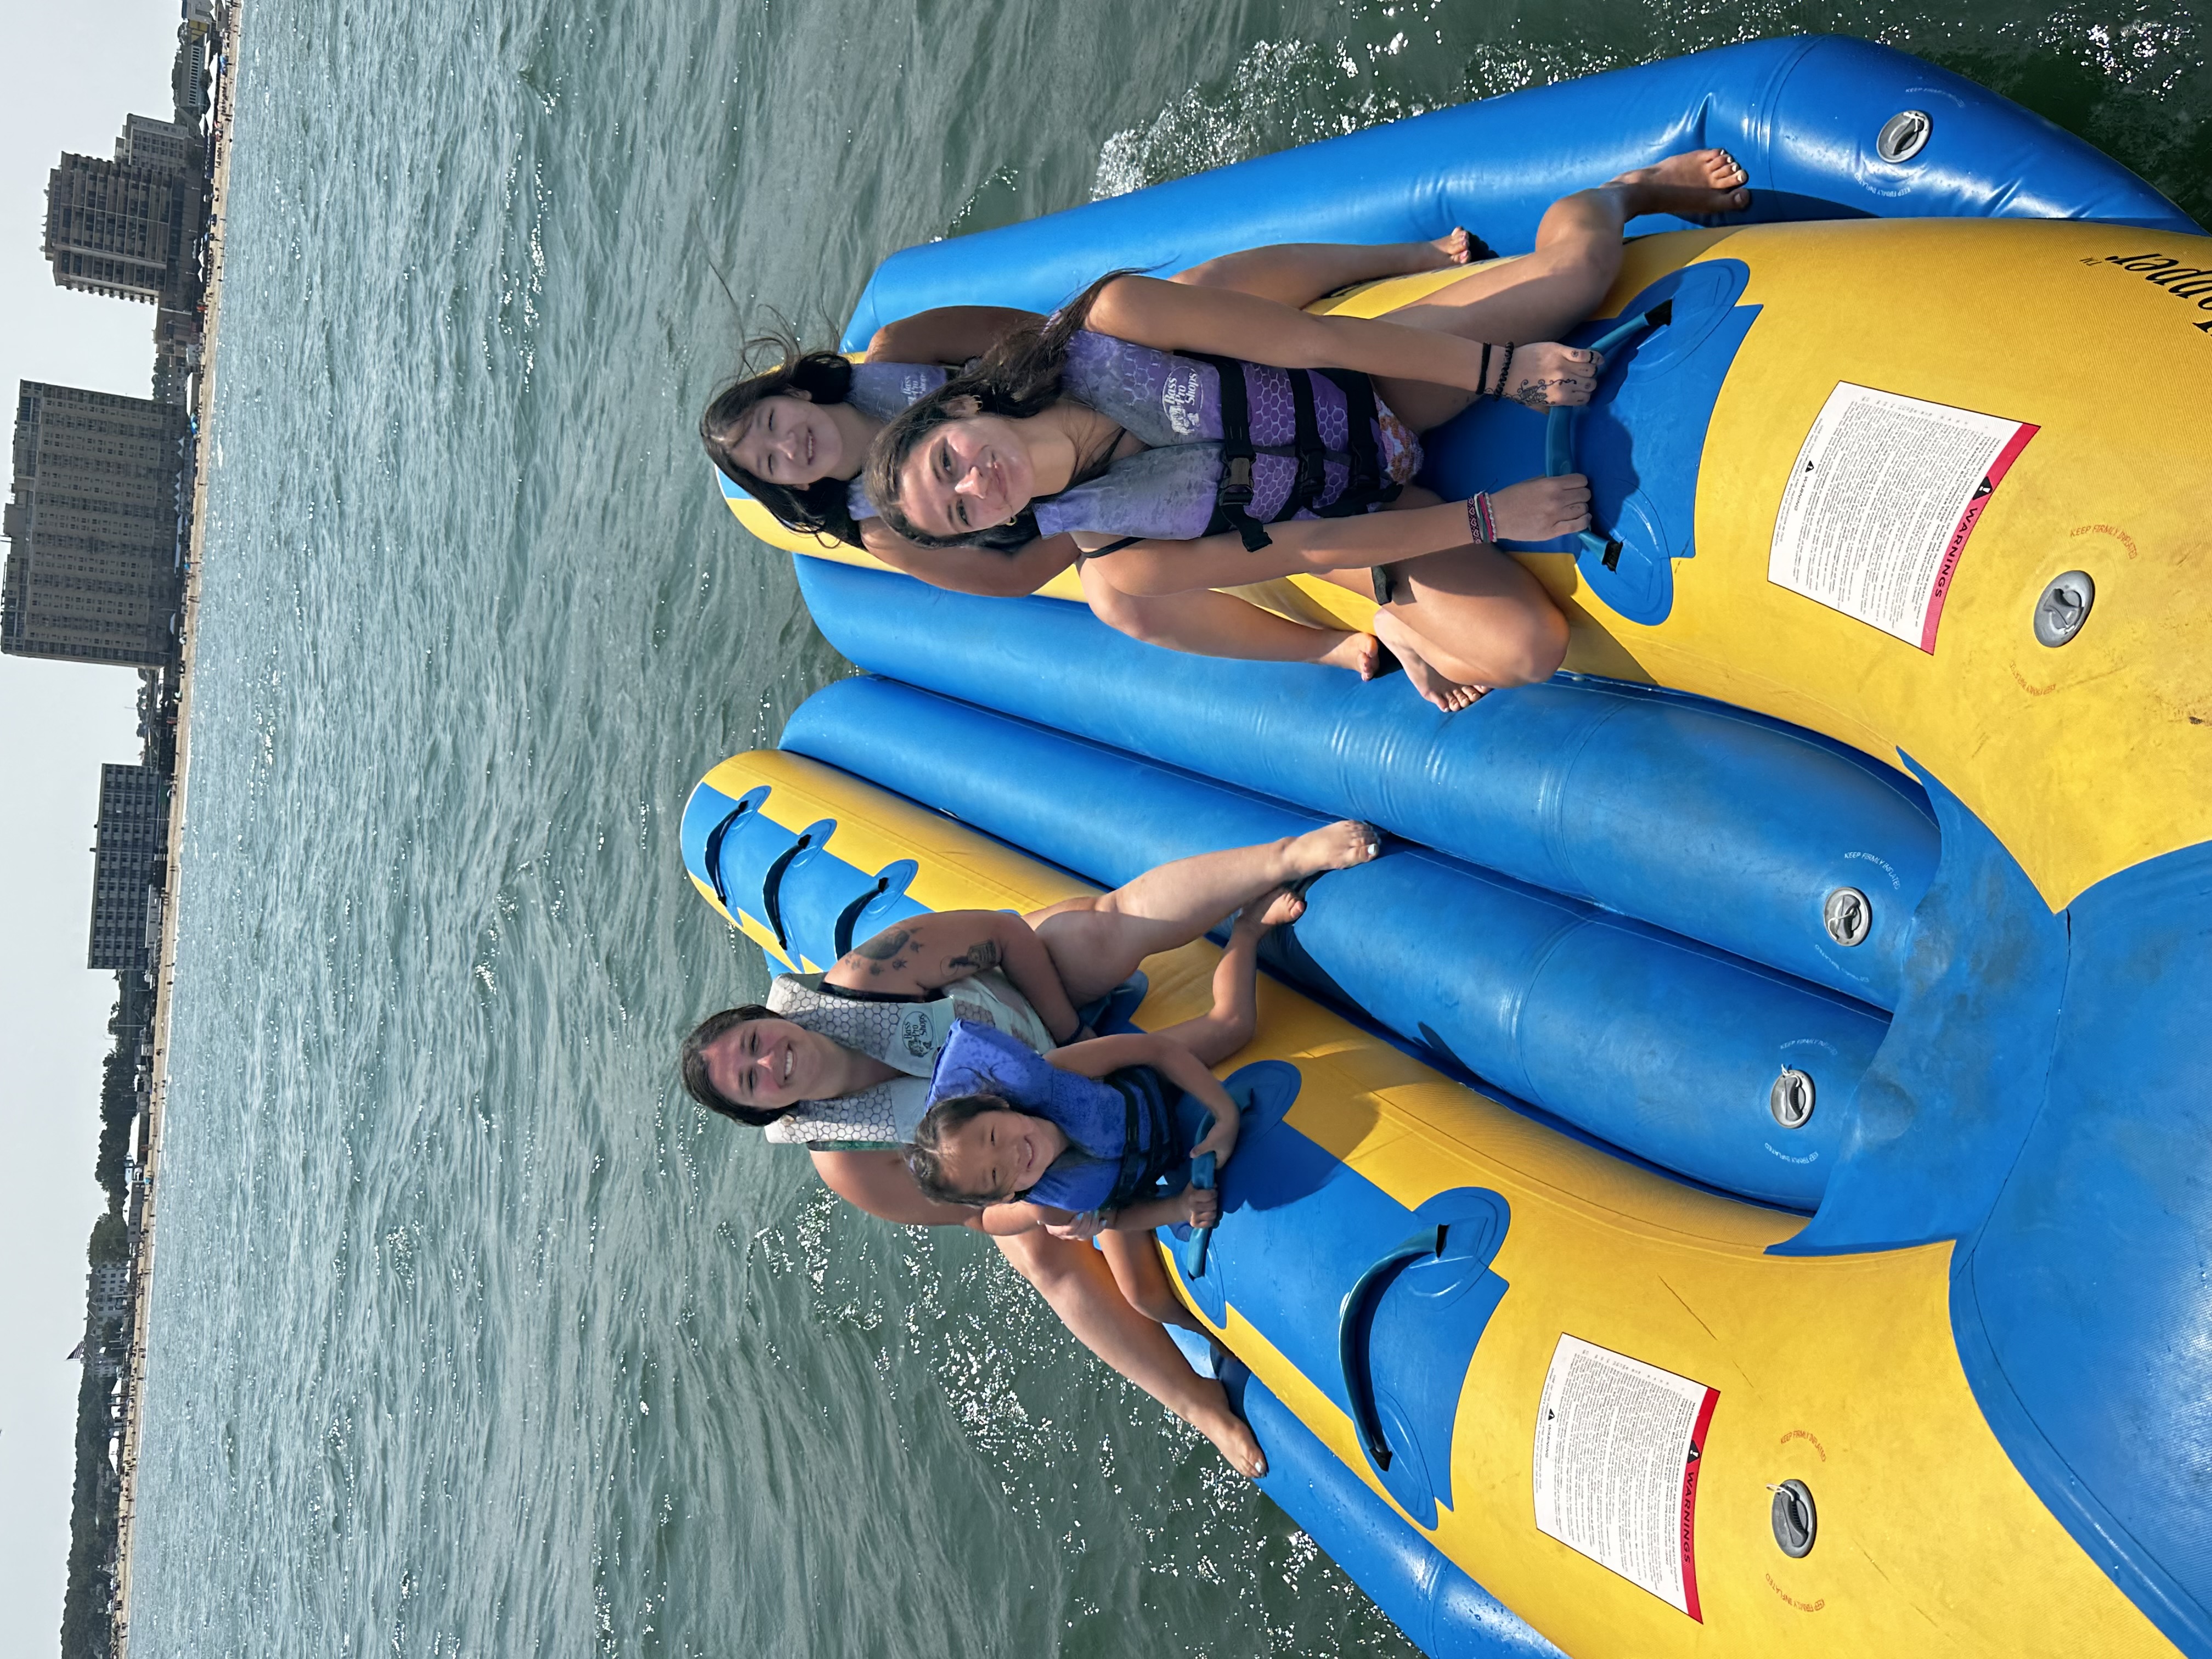 Family time on the banana boat!...